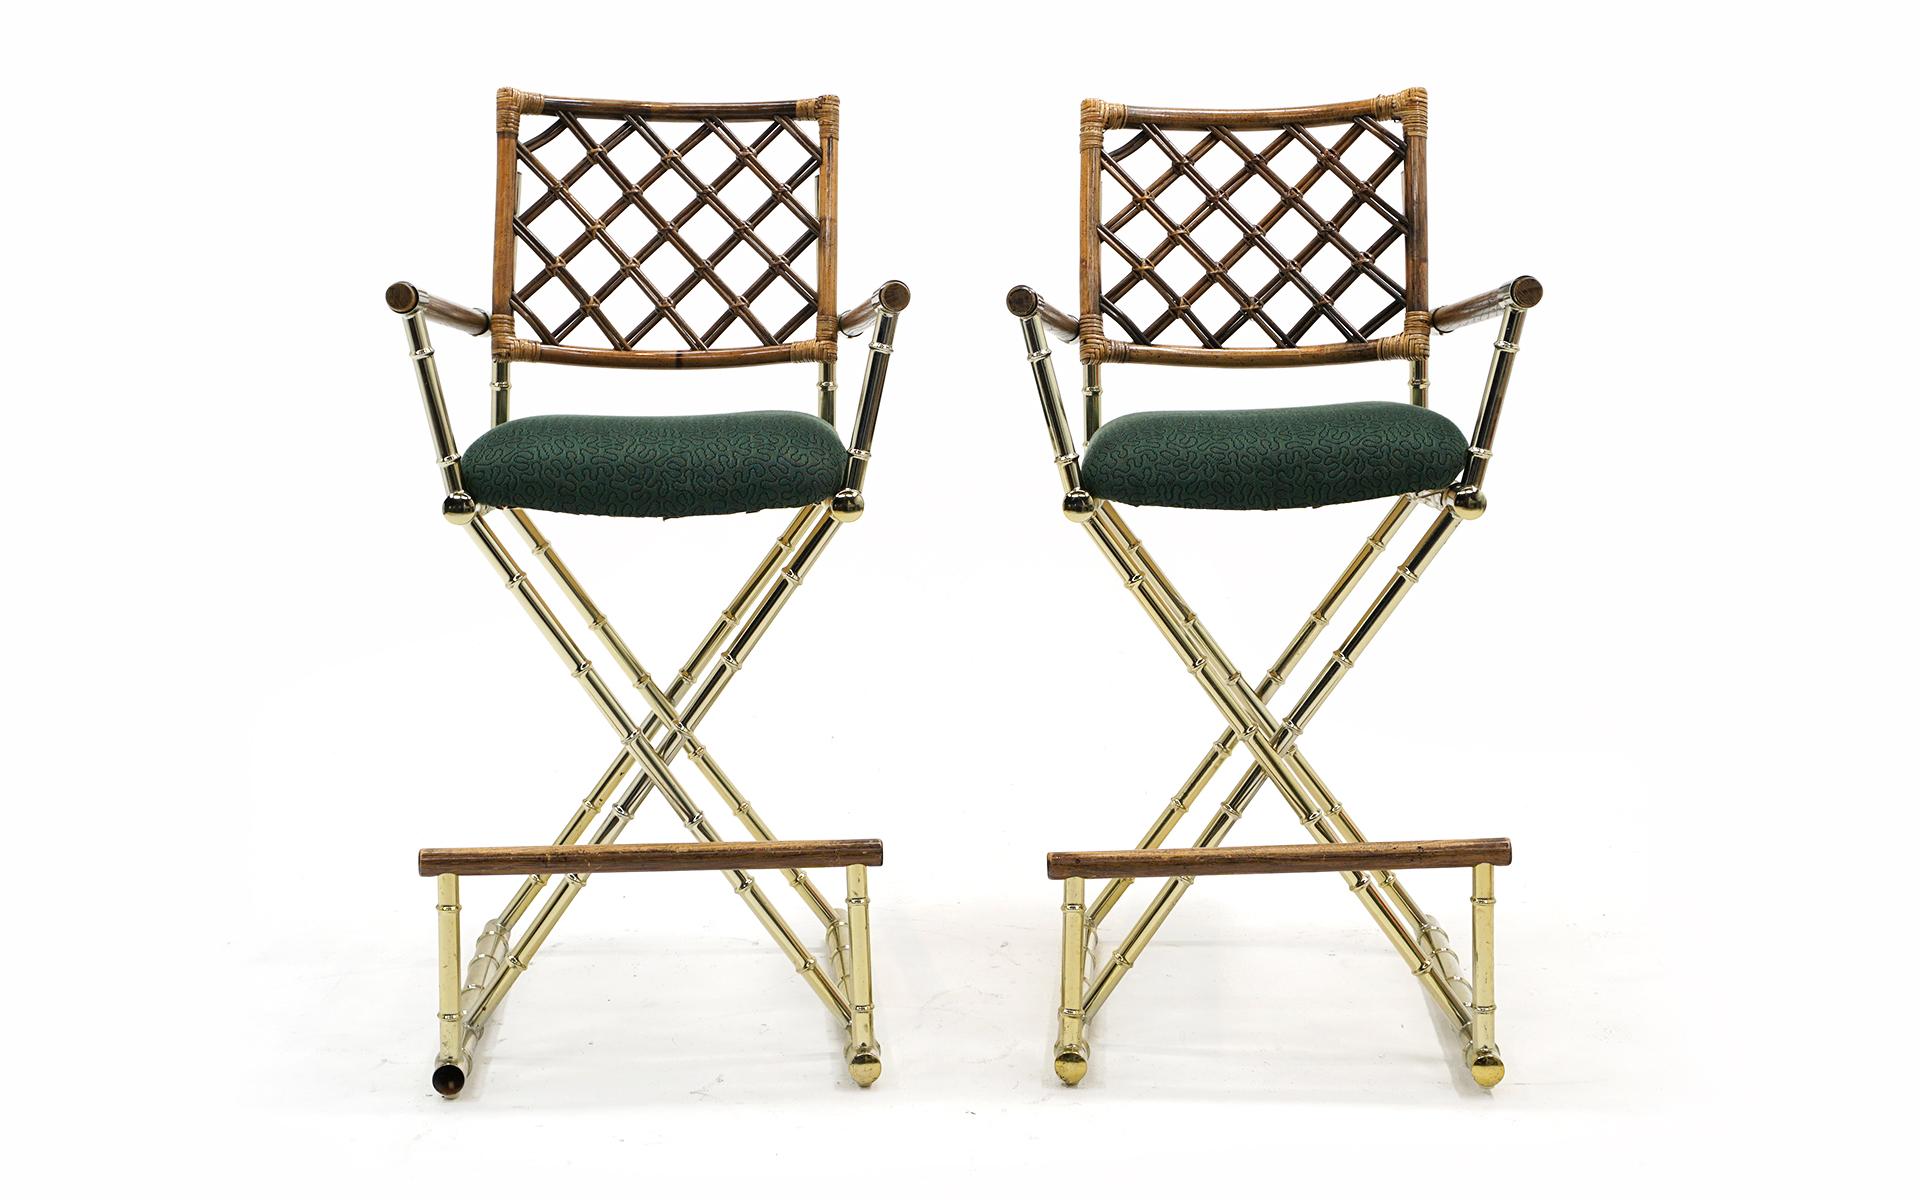 Pair (two) campaign style barstools with faux bamboo brass frames, with bamboo and rattan arms, seat backs, and footrests. Green upholstered seats are in good condition as well, but would also be an easy redo. Both stools are sturdy and ready to use.